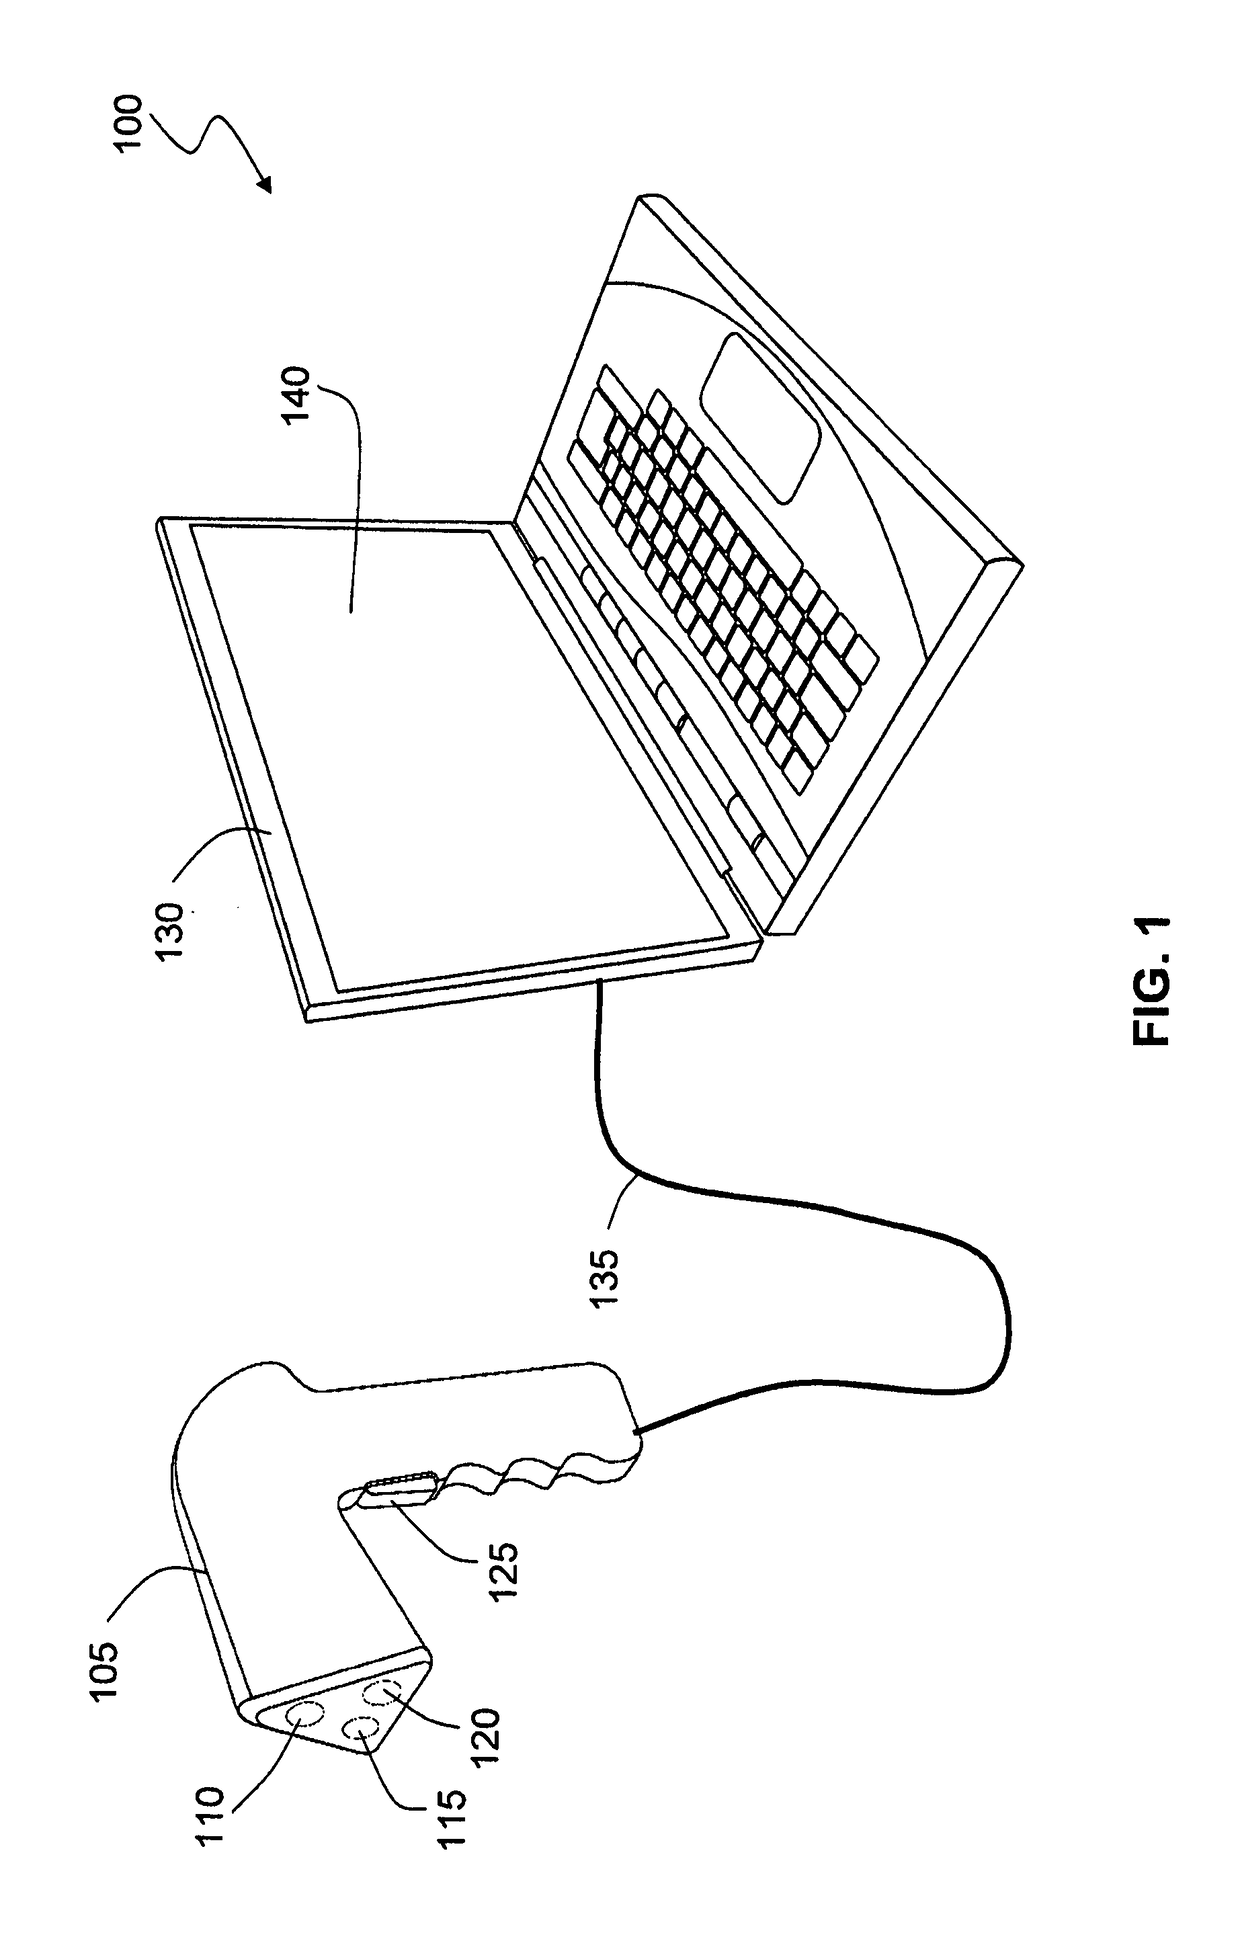 3D imaging method and system